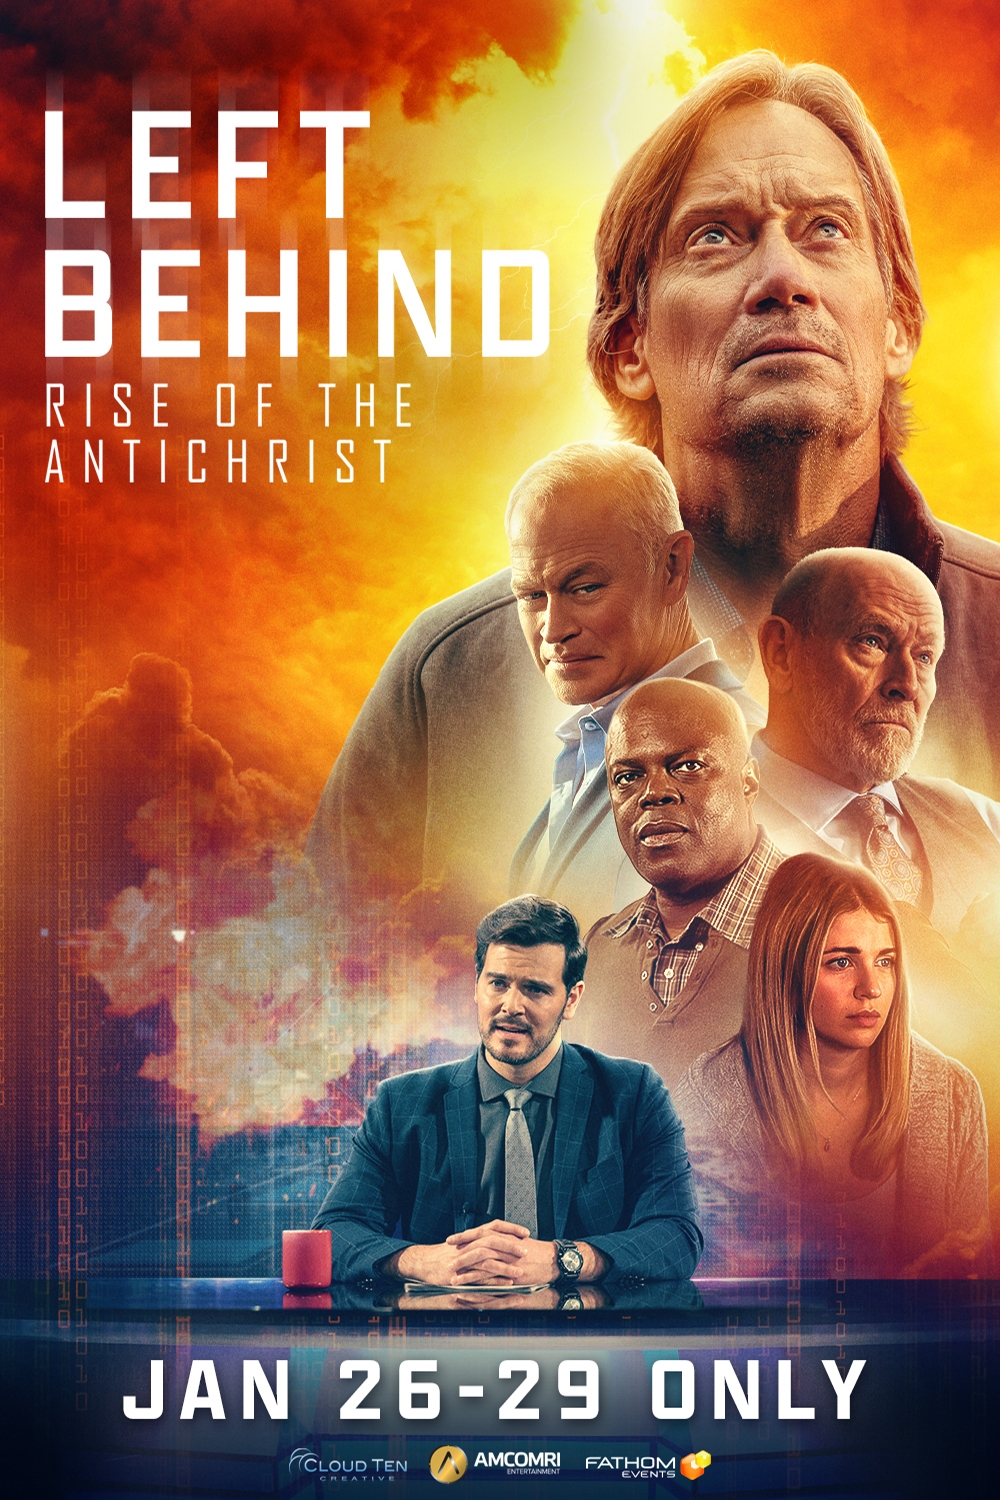 Upcoming Film Left Behind Rise of the Antichrist - Cast, Plot, Trailer, Release Date & More